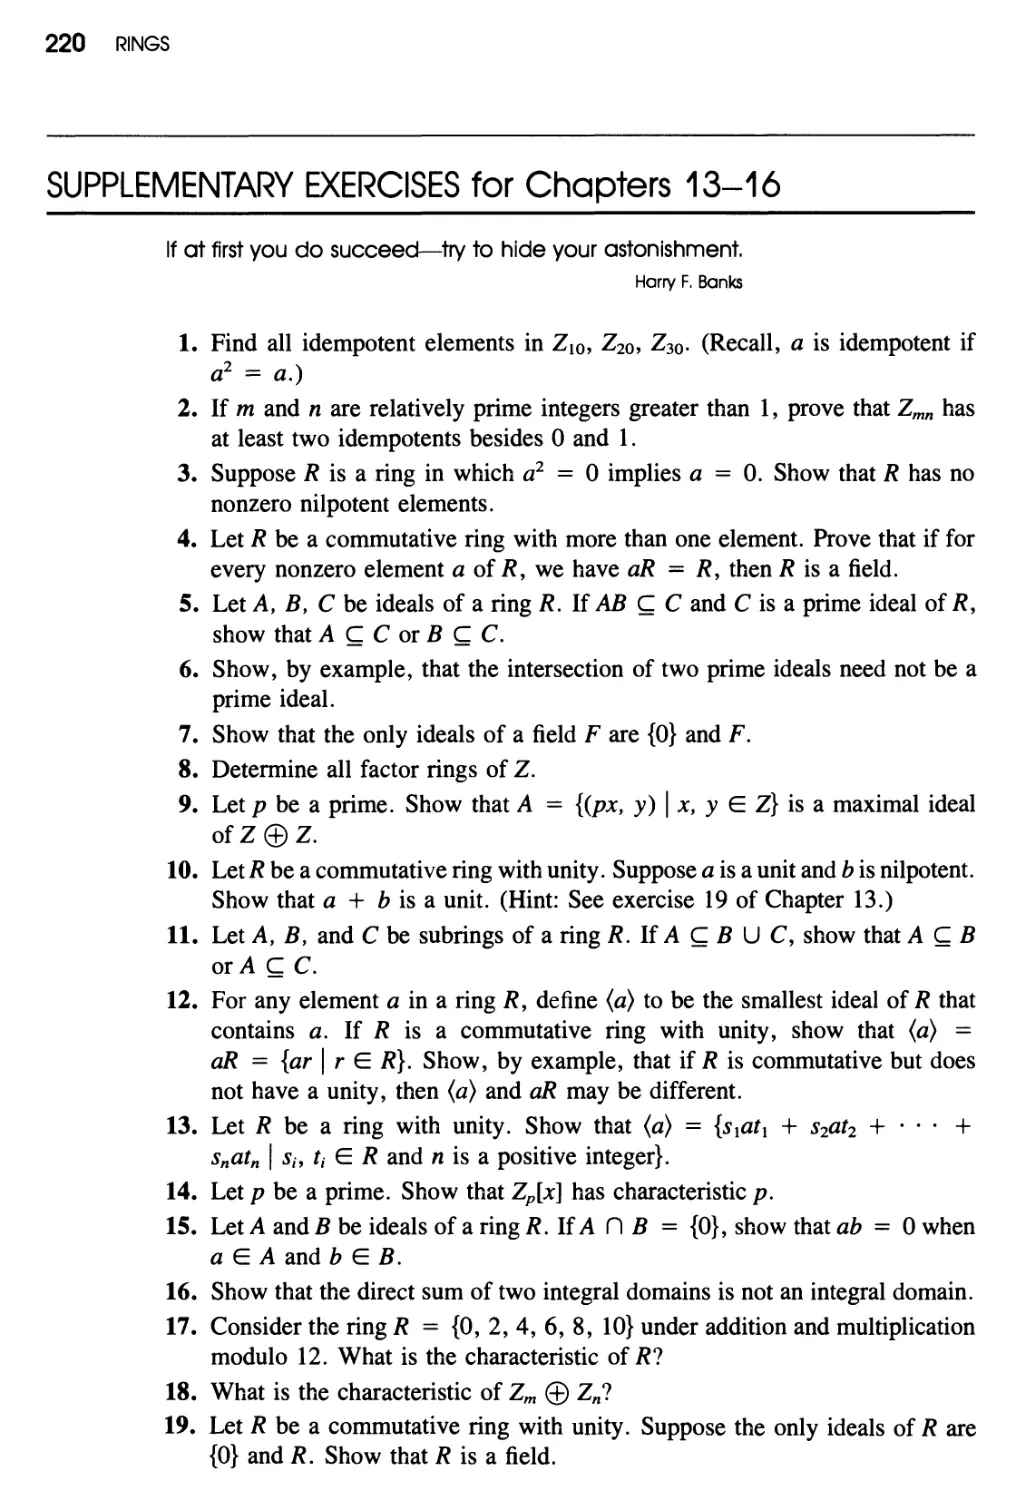 Supplementary Exercises for Chapters 13-16